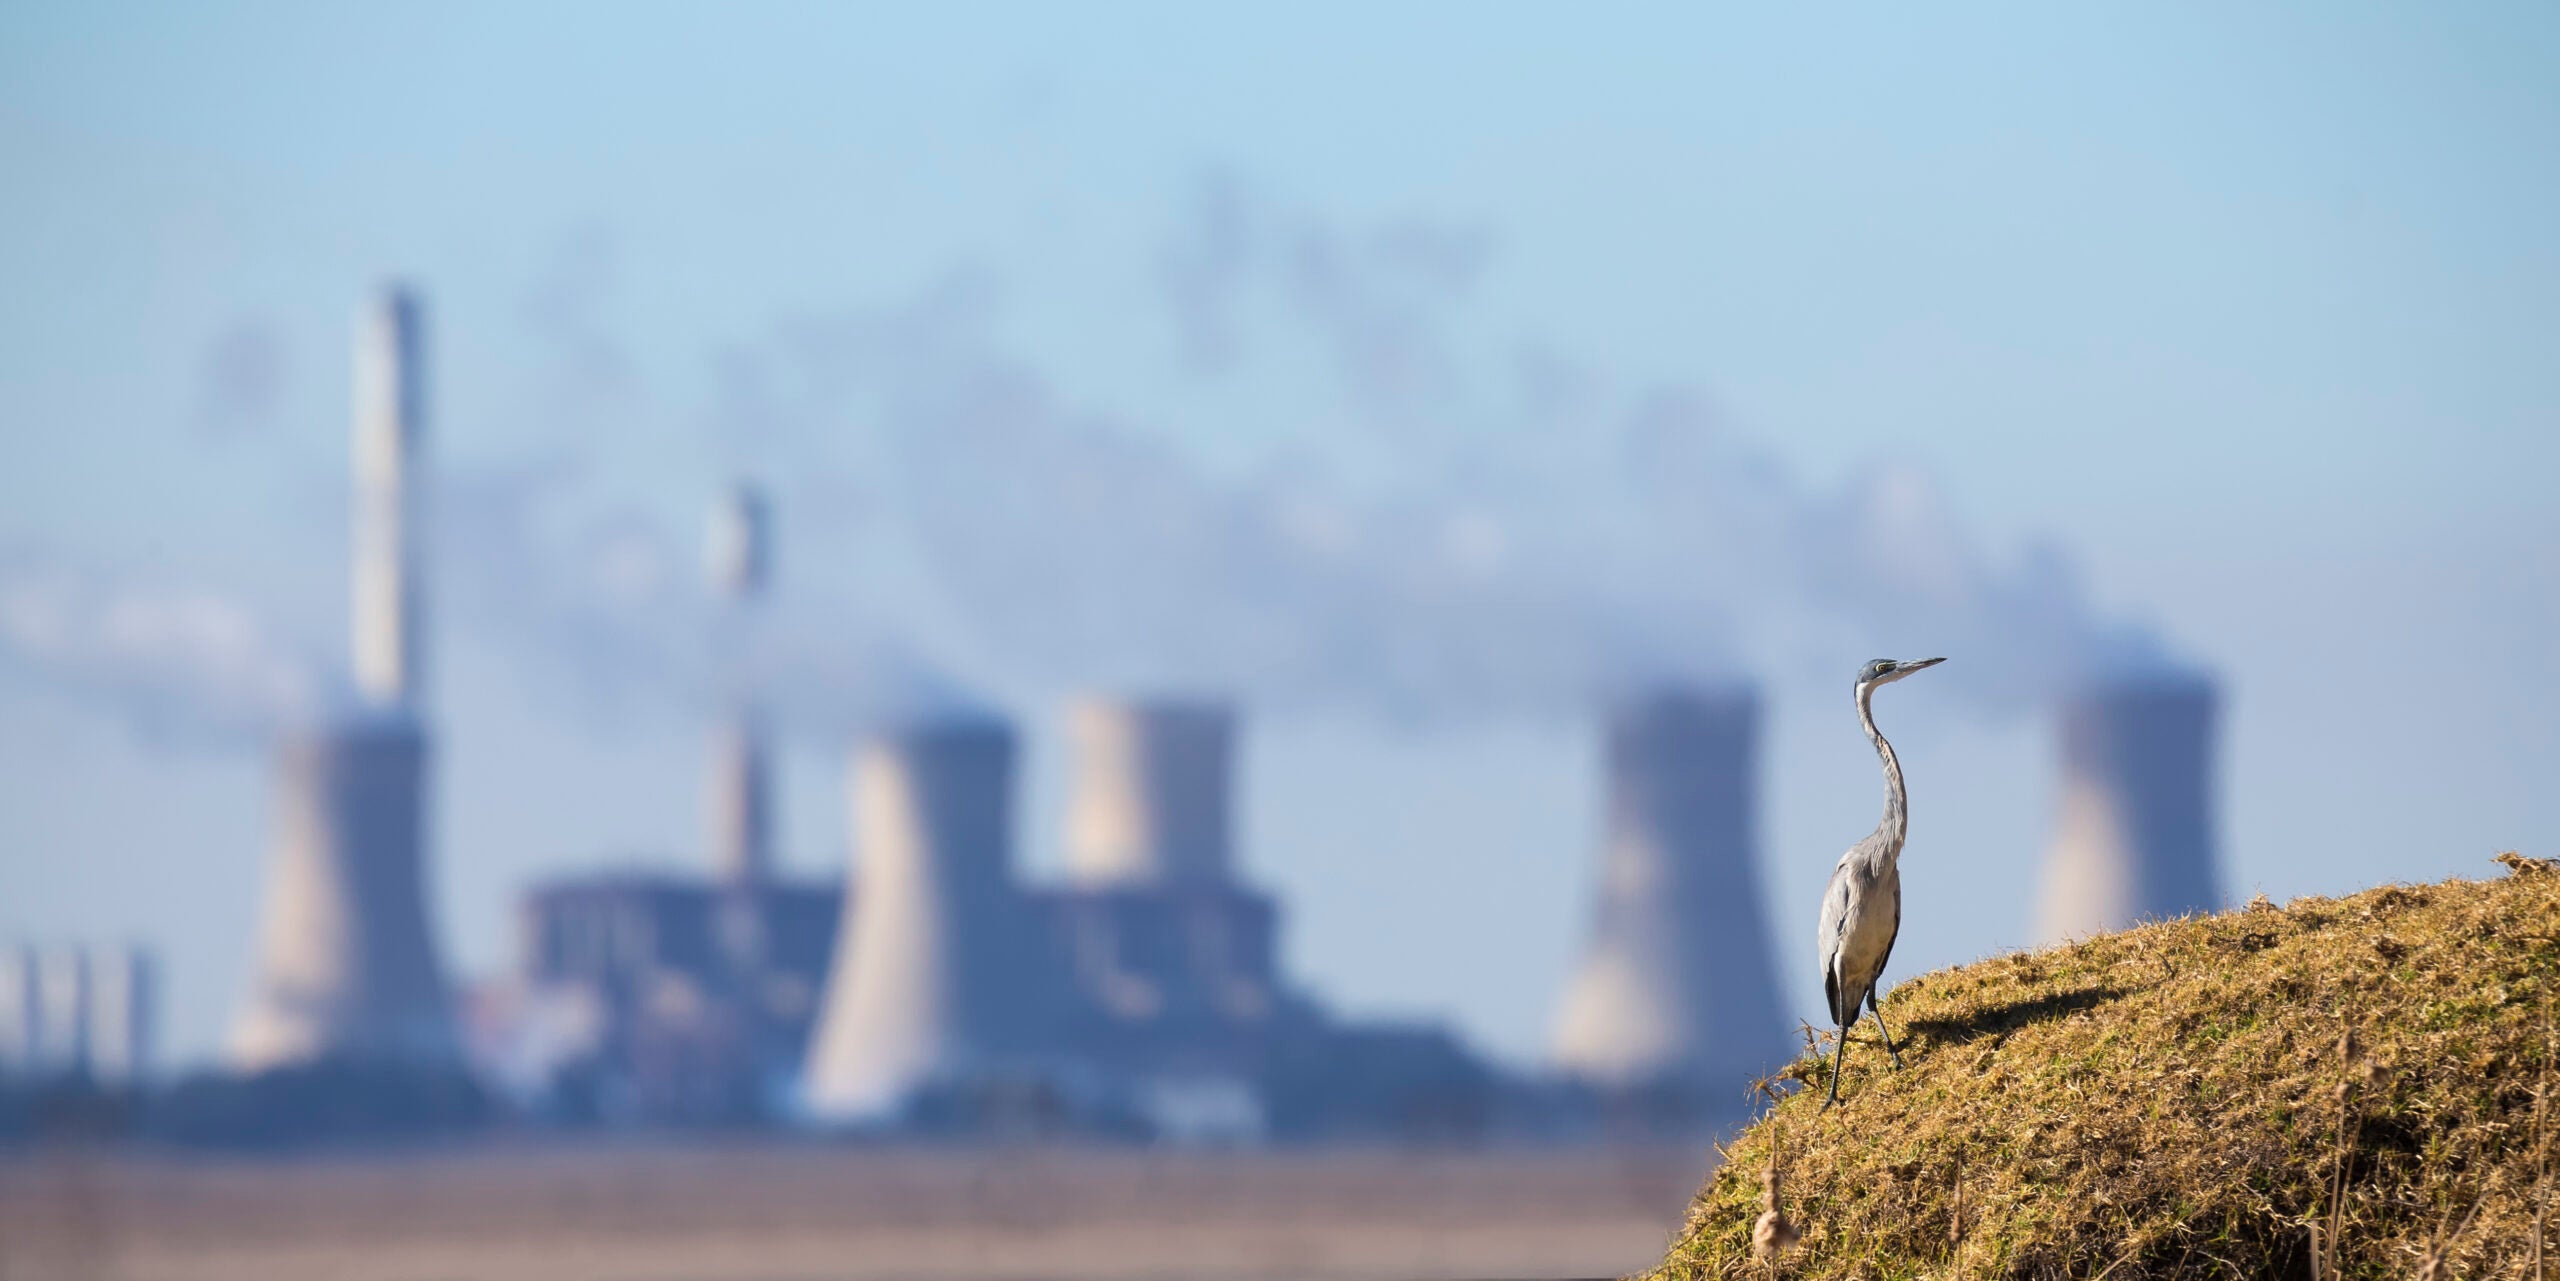 Pollution looms over a grey heron near a power station. A recent UN report found that more than 500,000 land species do not have enough natural habitat left to ensure their long-term survival.
(Alta Oosthuizen / Getty Images)